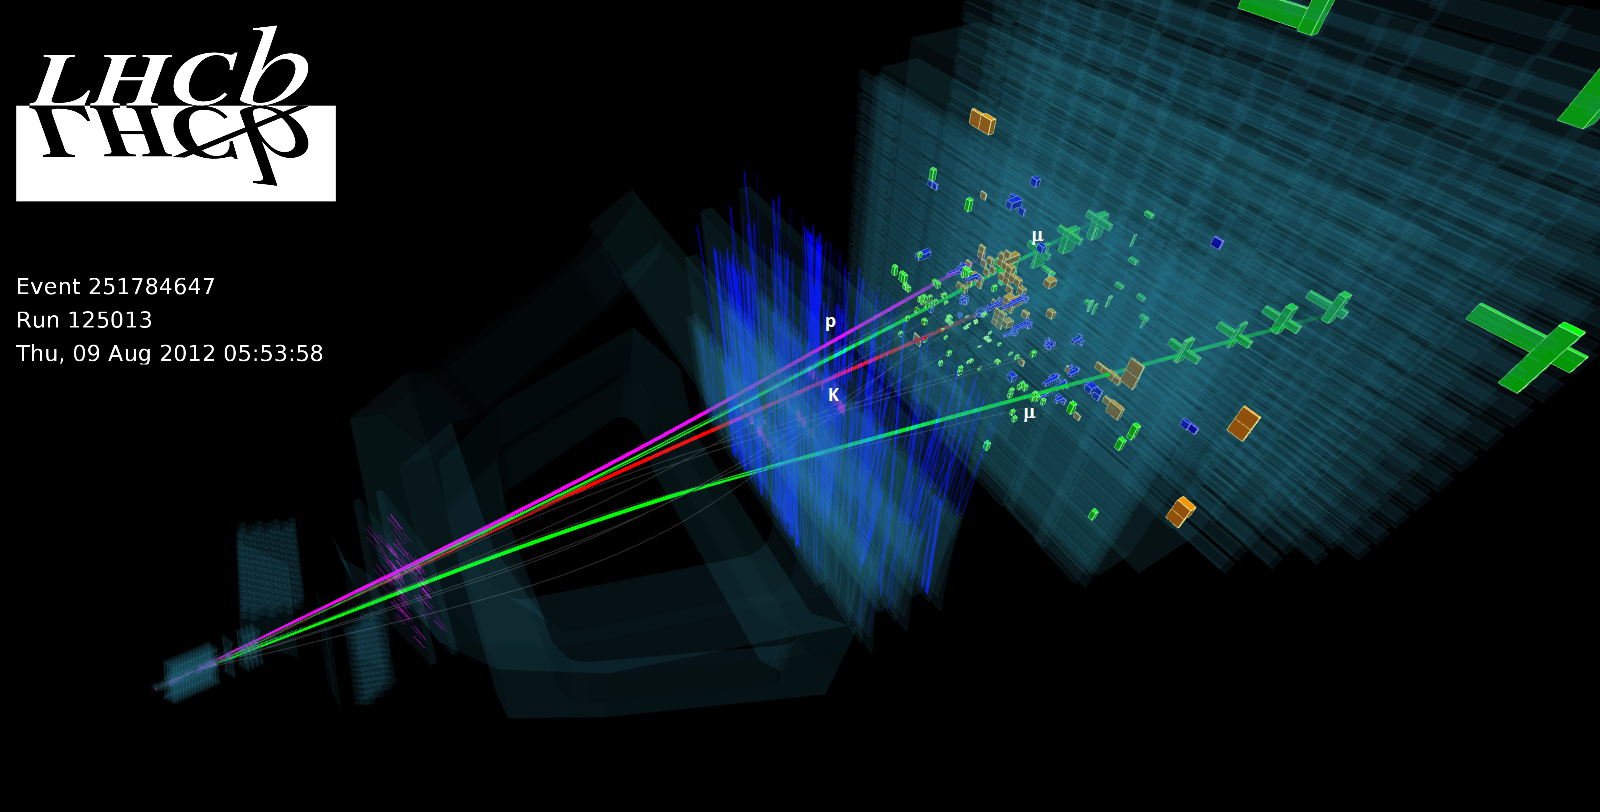 LHCb releases the entire Run I dataset